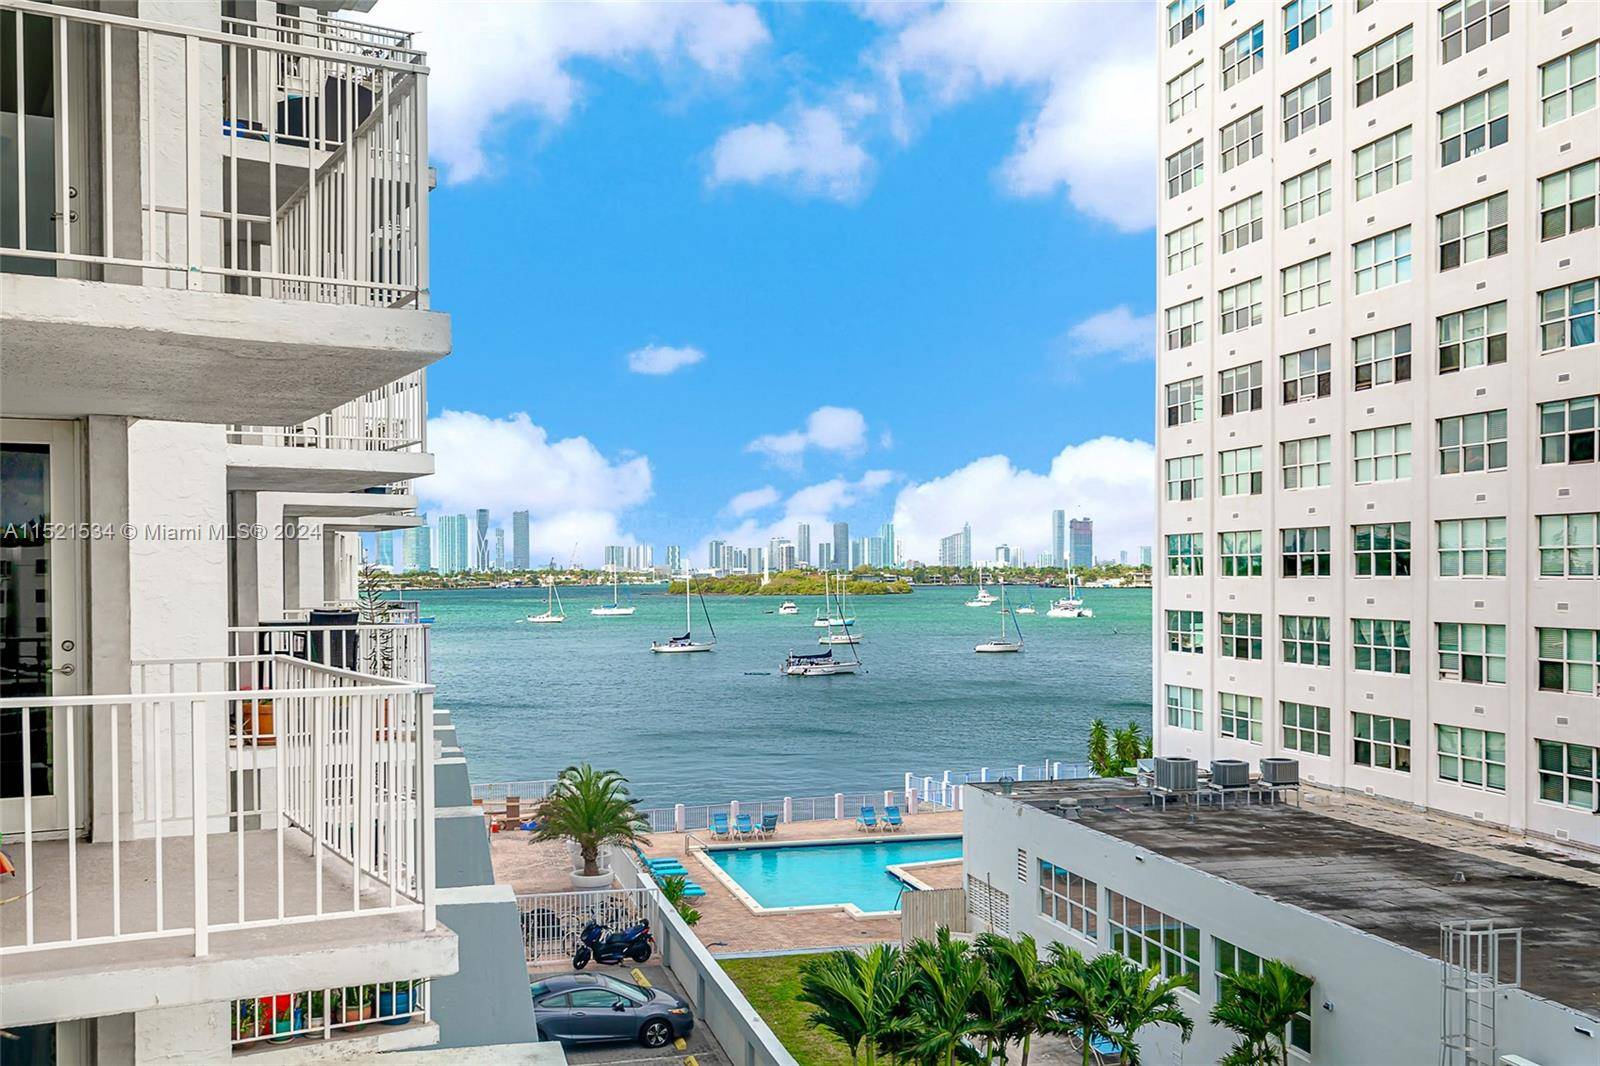 Indulge in the epitome of luxury living with this meticulously designed 1 bedroom condo, situated in a beautifully remodeled waterfront building.